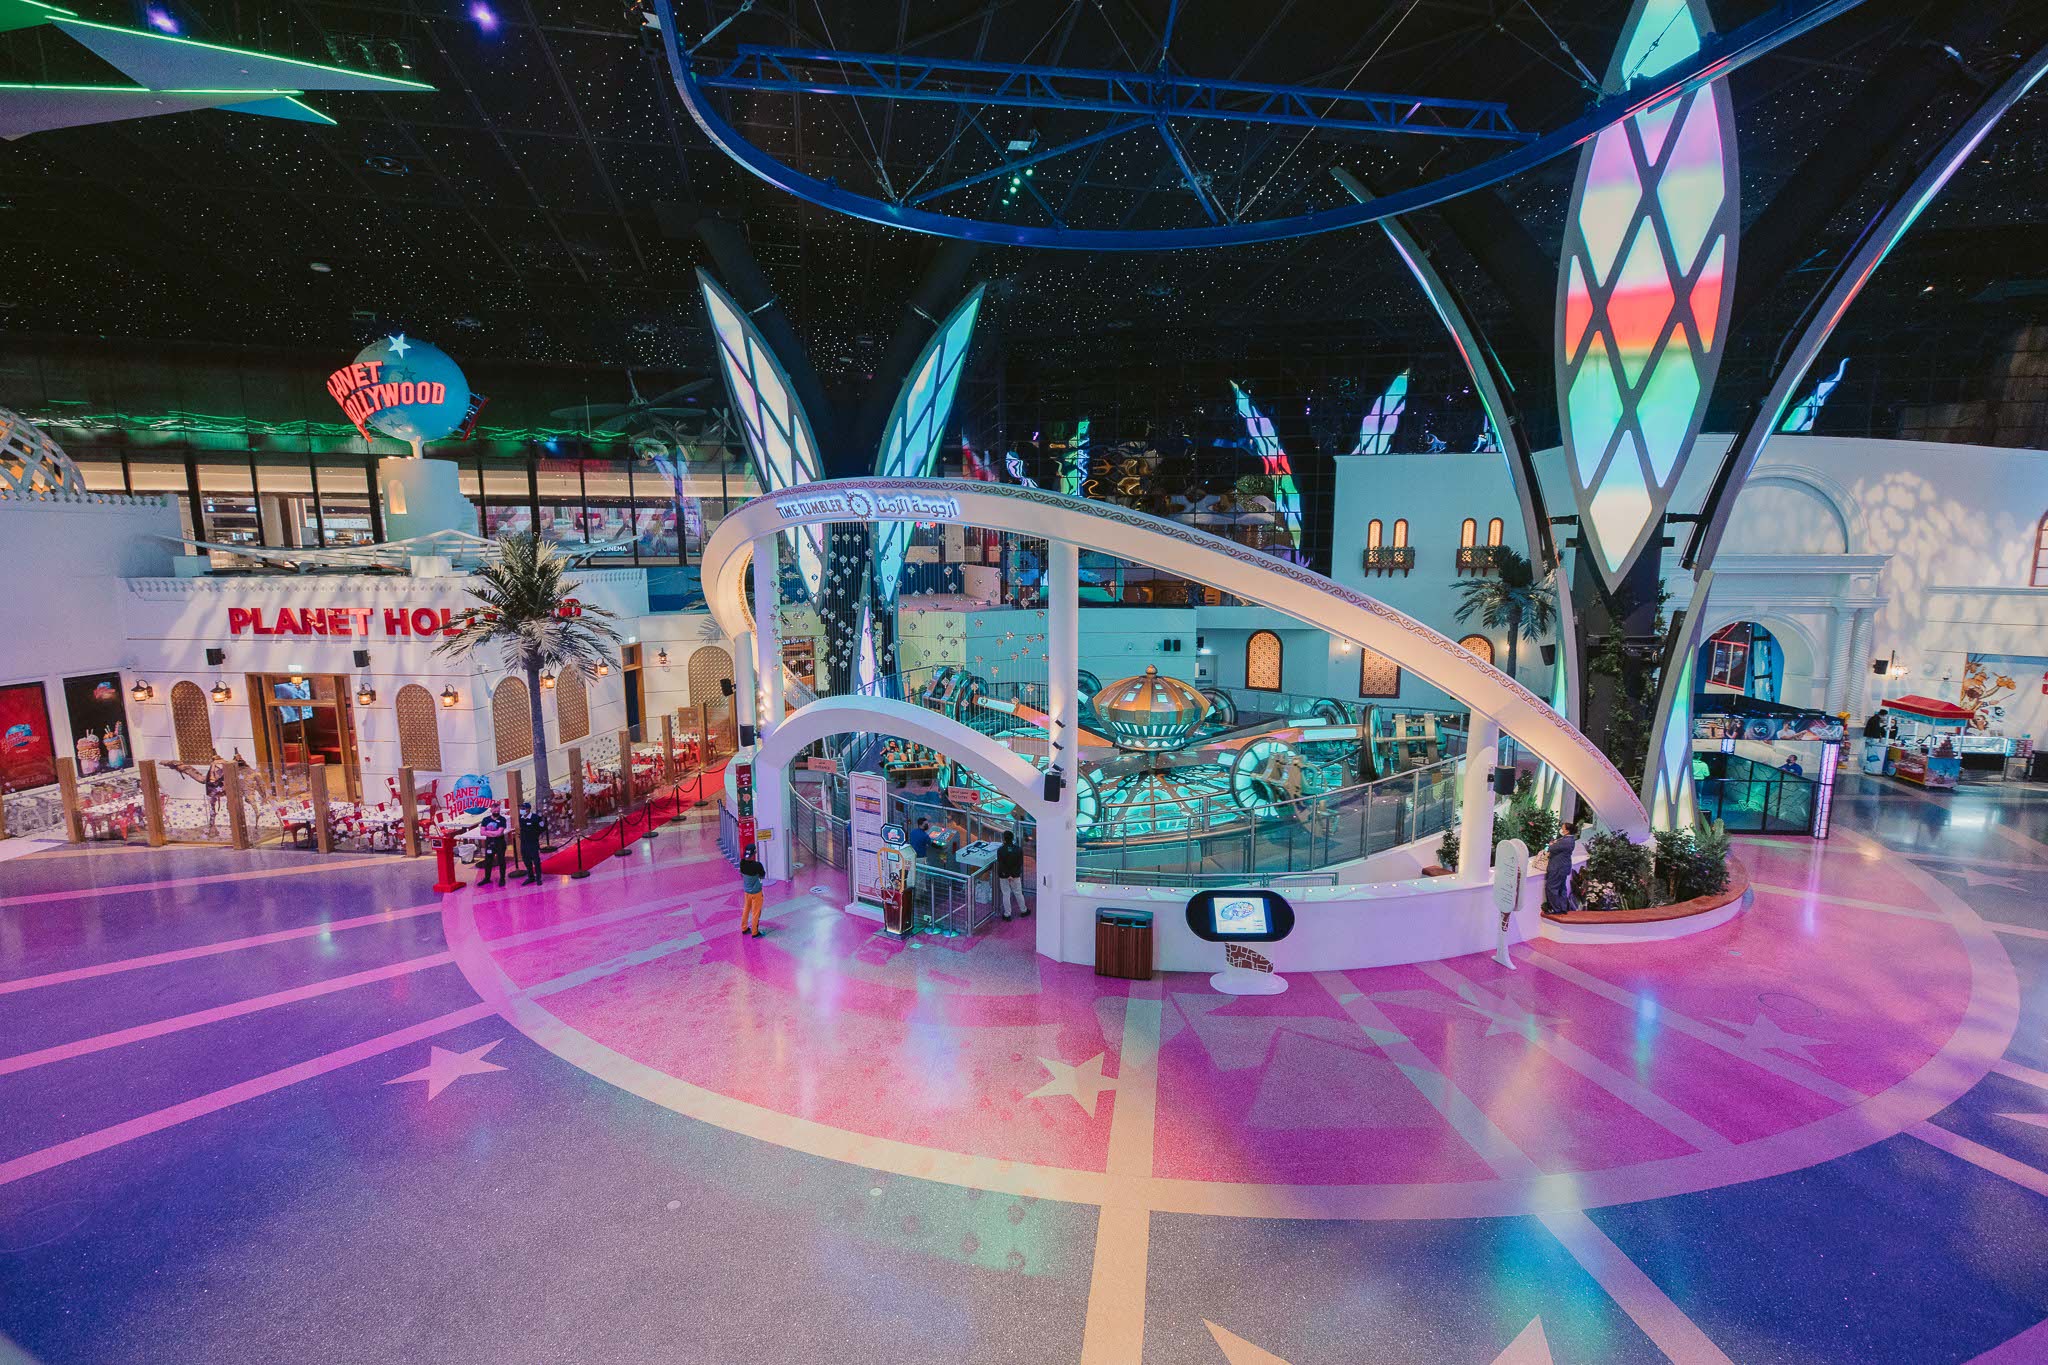 An aerial view of a spacious hall. On the left, a Planet Hollywood restaurant designed in a Middle Eastern architectural style. Next to Planet Hollywood, two people (who appear to be security guards) stand at the end of a red carpet lined with velvet rope. In the centre is an amusement ride called Time Tumbler. It appears to be in the octopus style, with eight arms that revolve around a central axis of rotation while moving up and down in a wavelike motion. To the right of the Time Tumbler is a large door that appears to lead to another room. To the right of this is a concession stand. The ceiling of the space is painted to look like the night sky.